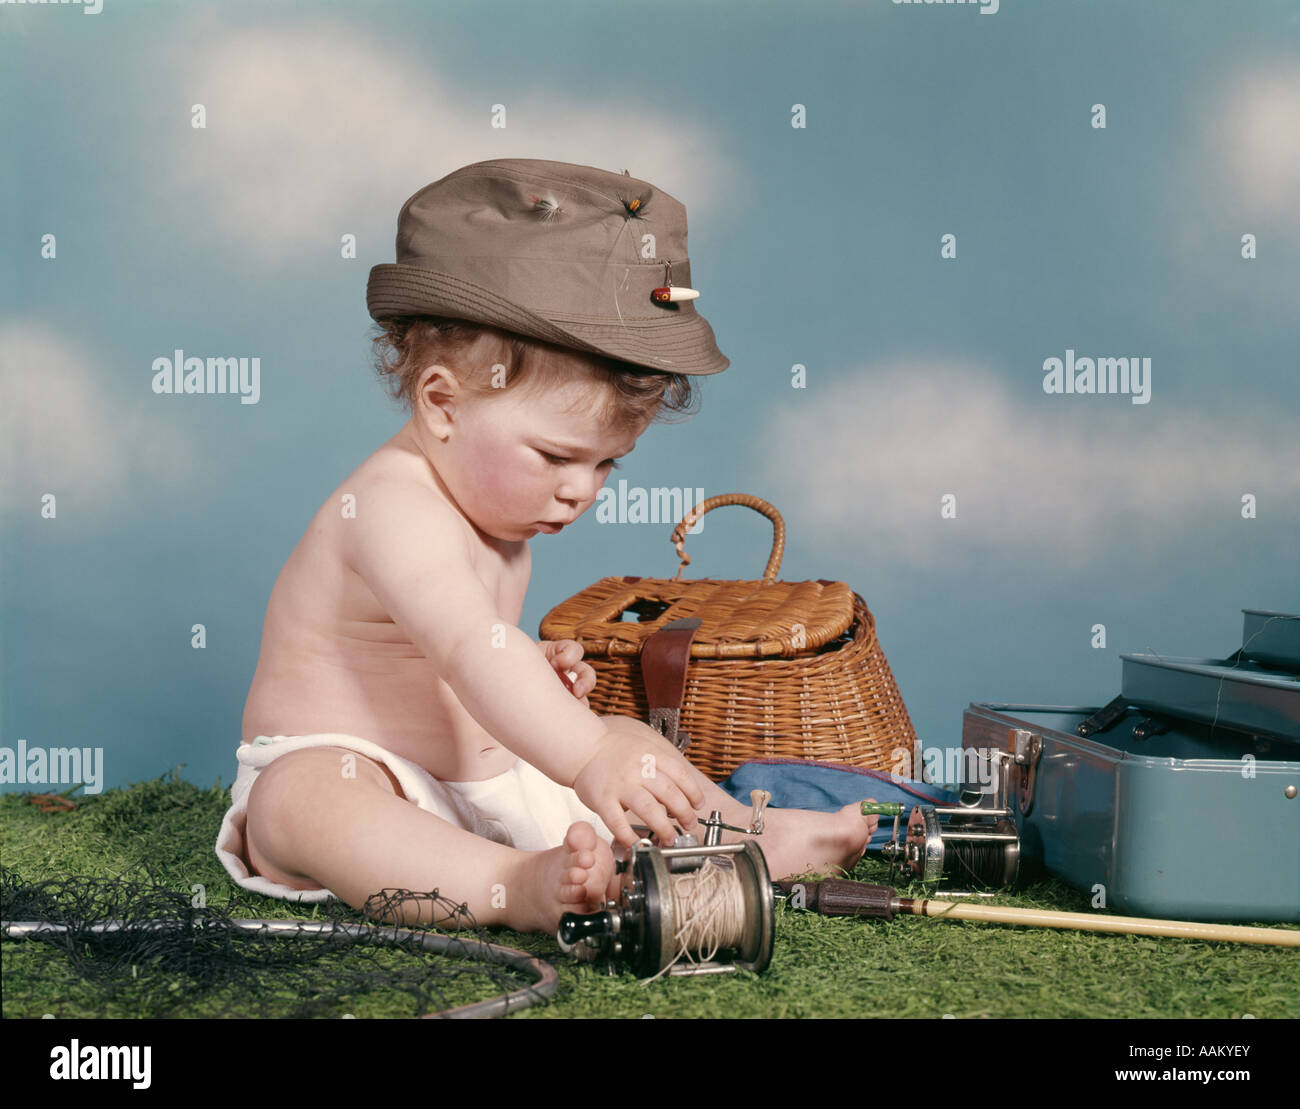 https://c8.alamy.com/comp/AAKYEY/1960s-baby-ready-to-go-fishing-wearing-hat-surrounded-by-tackle-box-AAKYEY.jpg